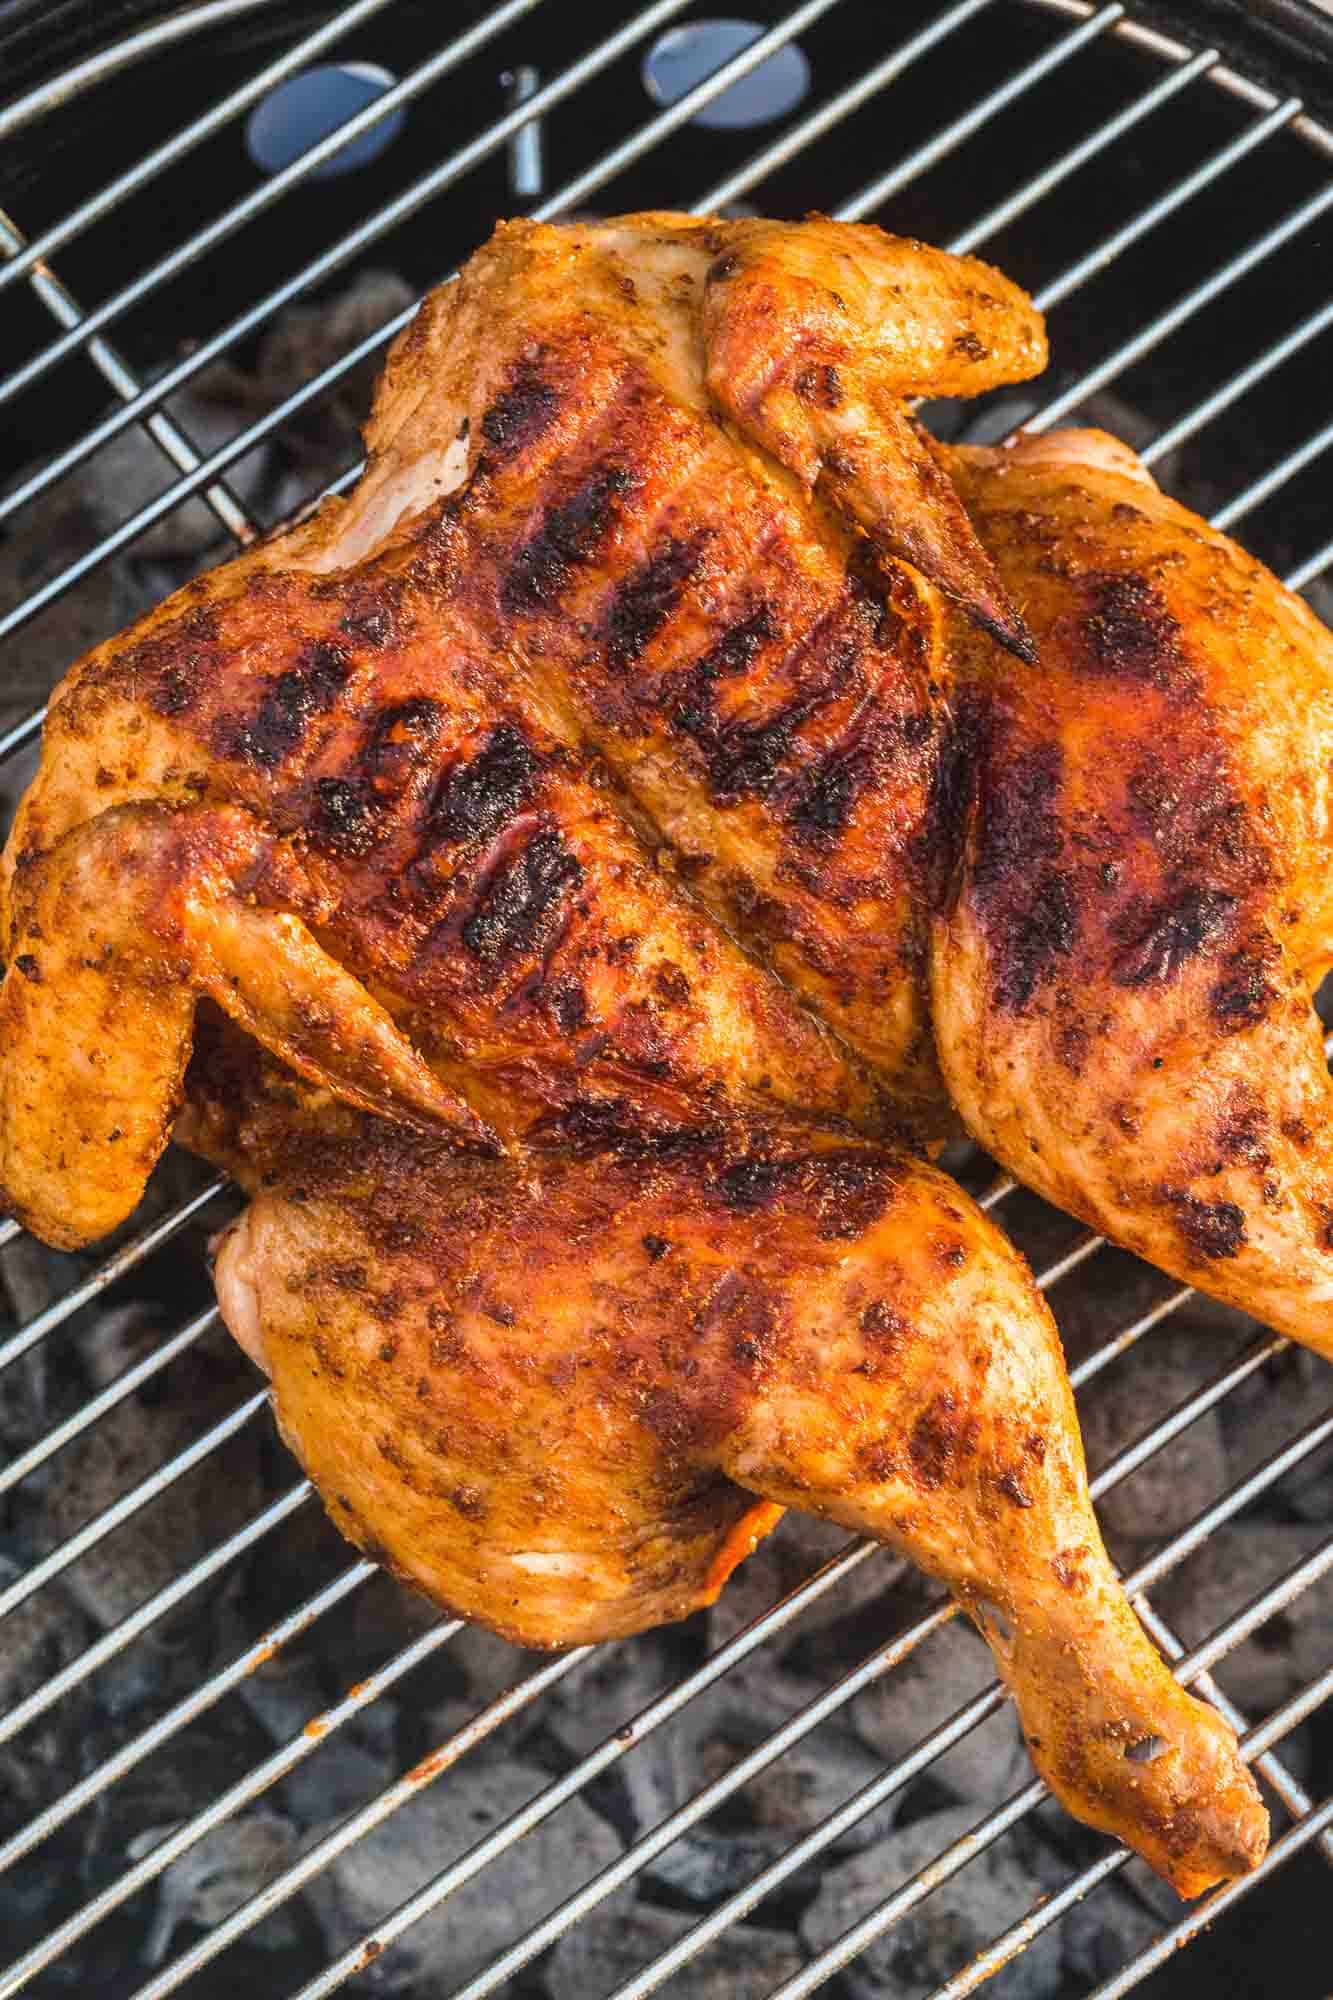 How To Grill Roast Spatchcock Chicken - Recipes.net